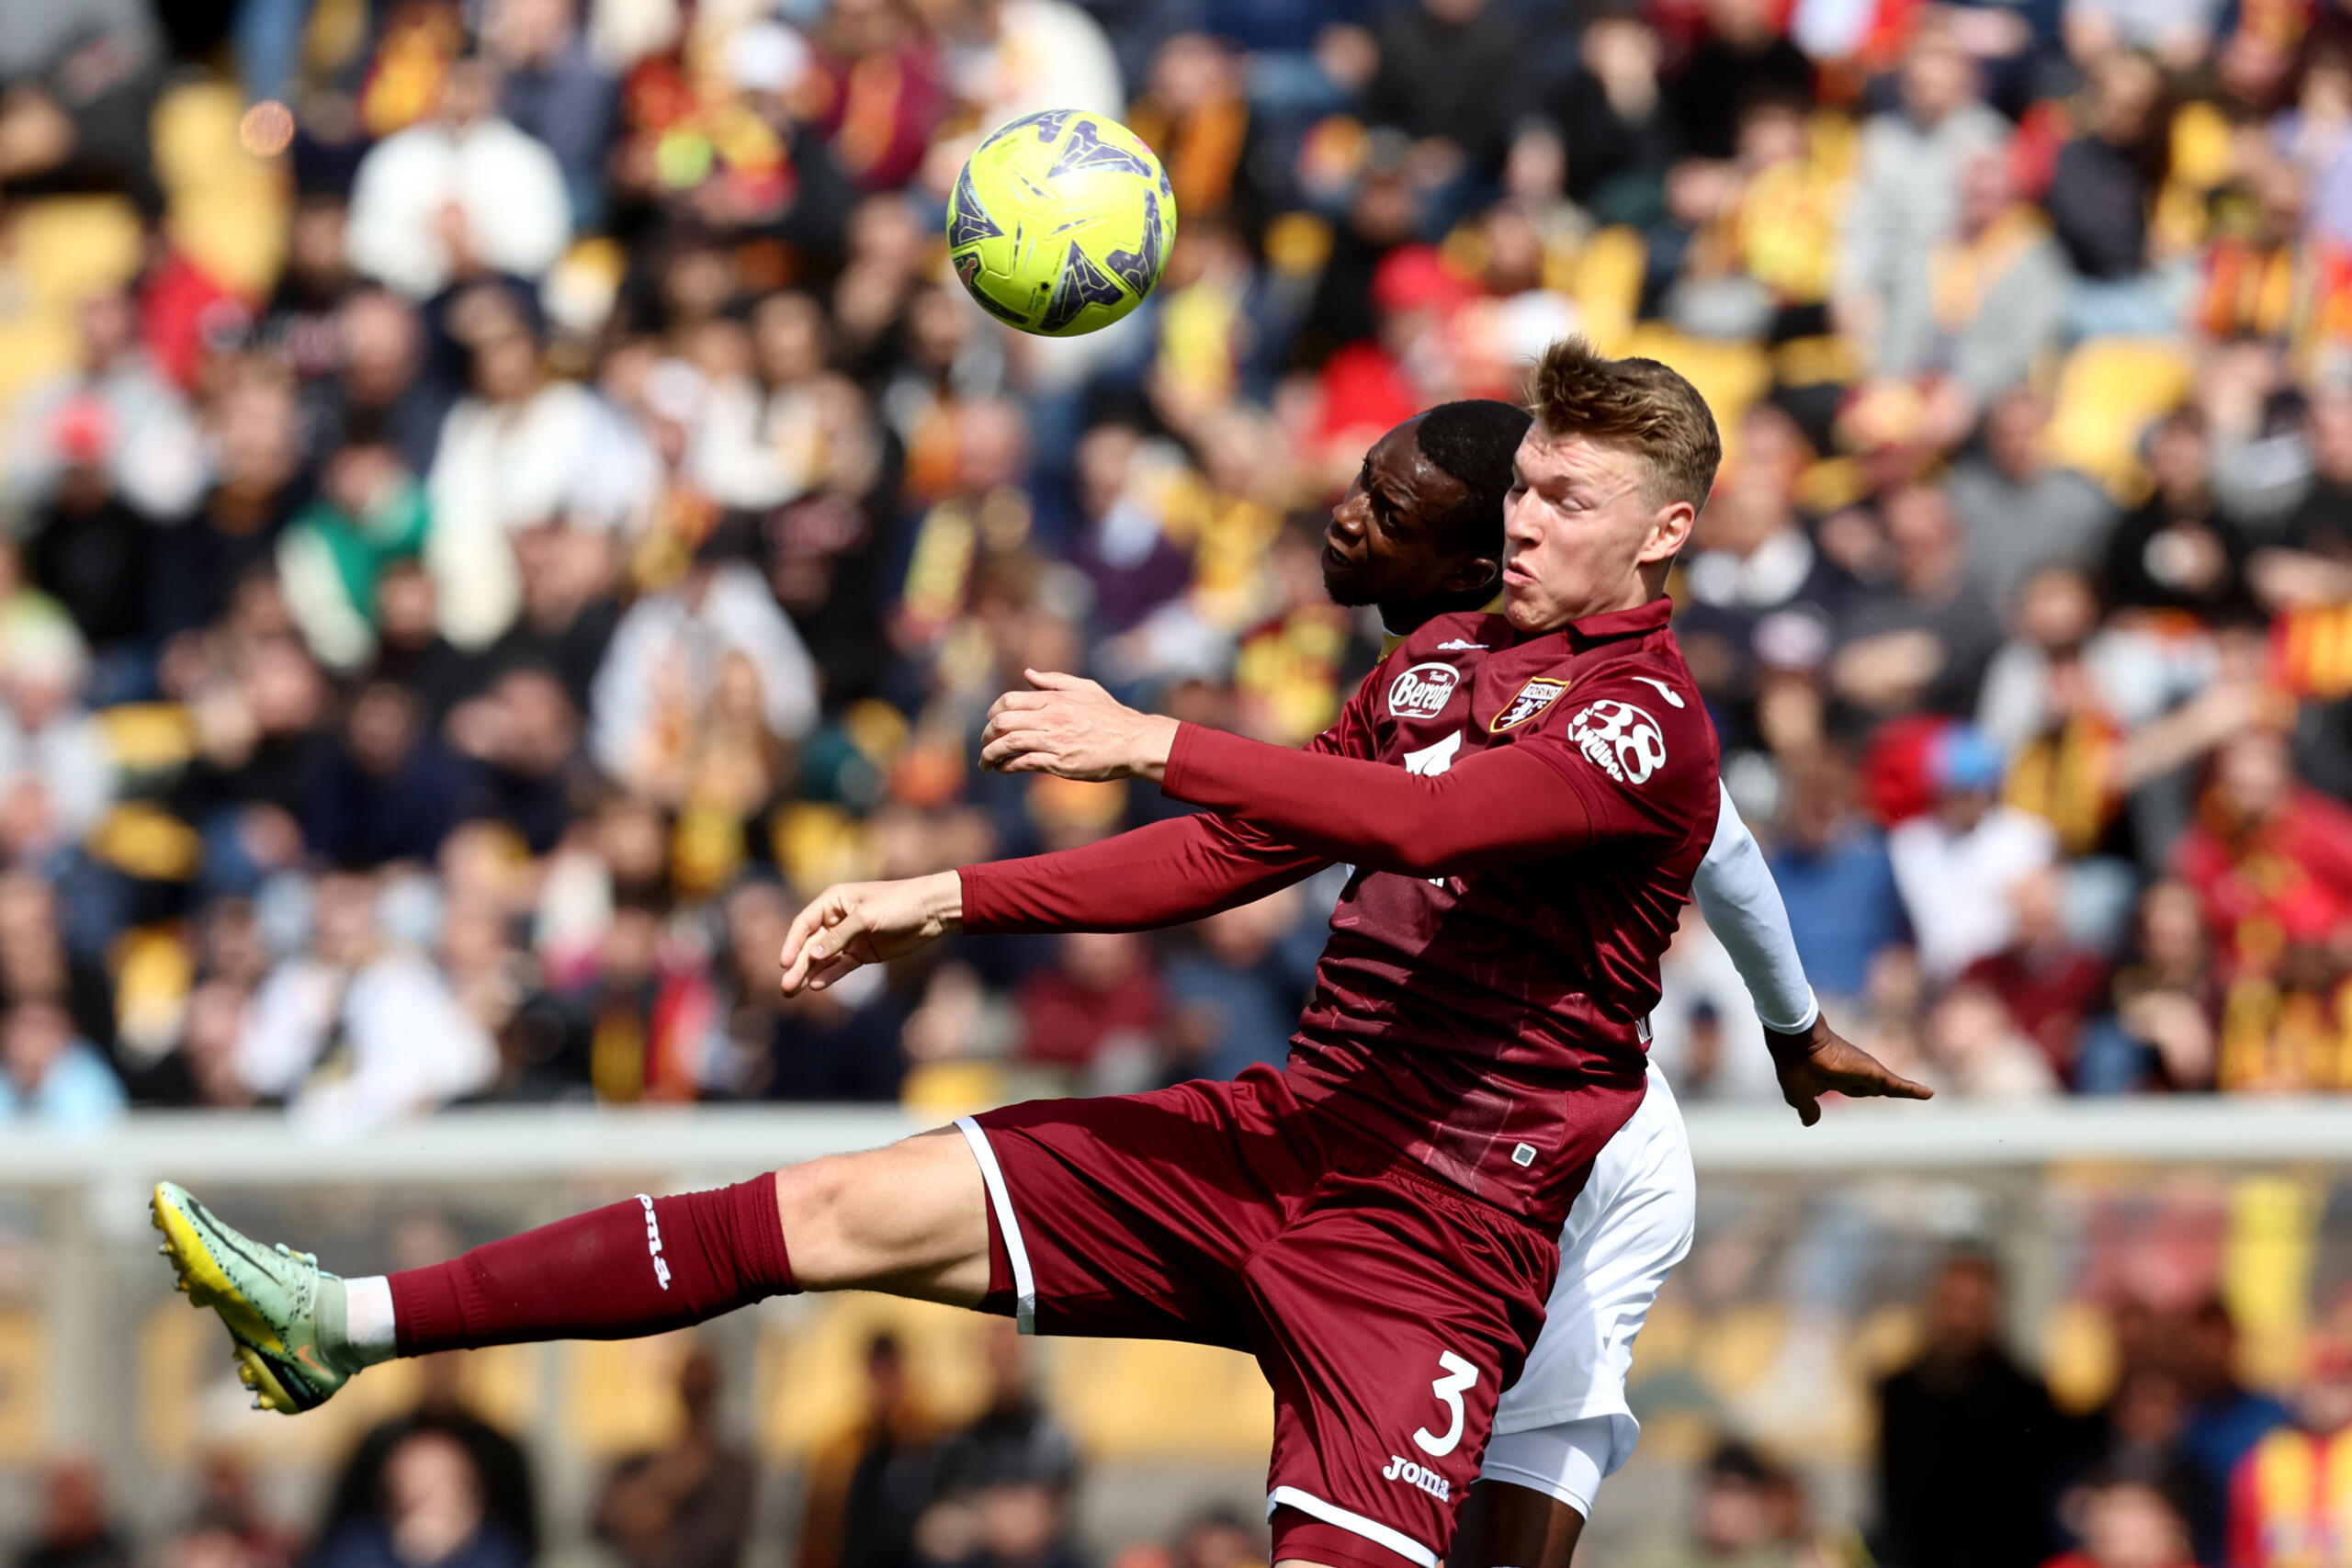 By targeting one of the two stoppers, Torino would not only make a considerable saving to invest but also onboard a proven defender to boost the backline.